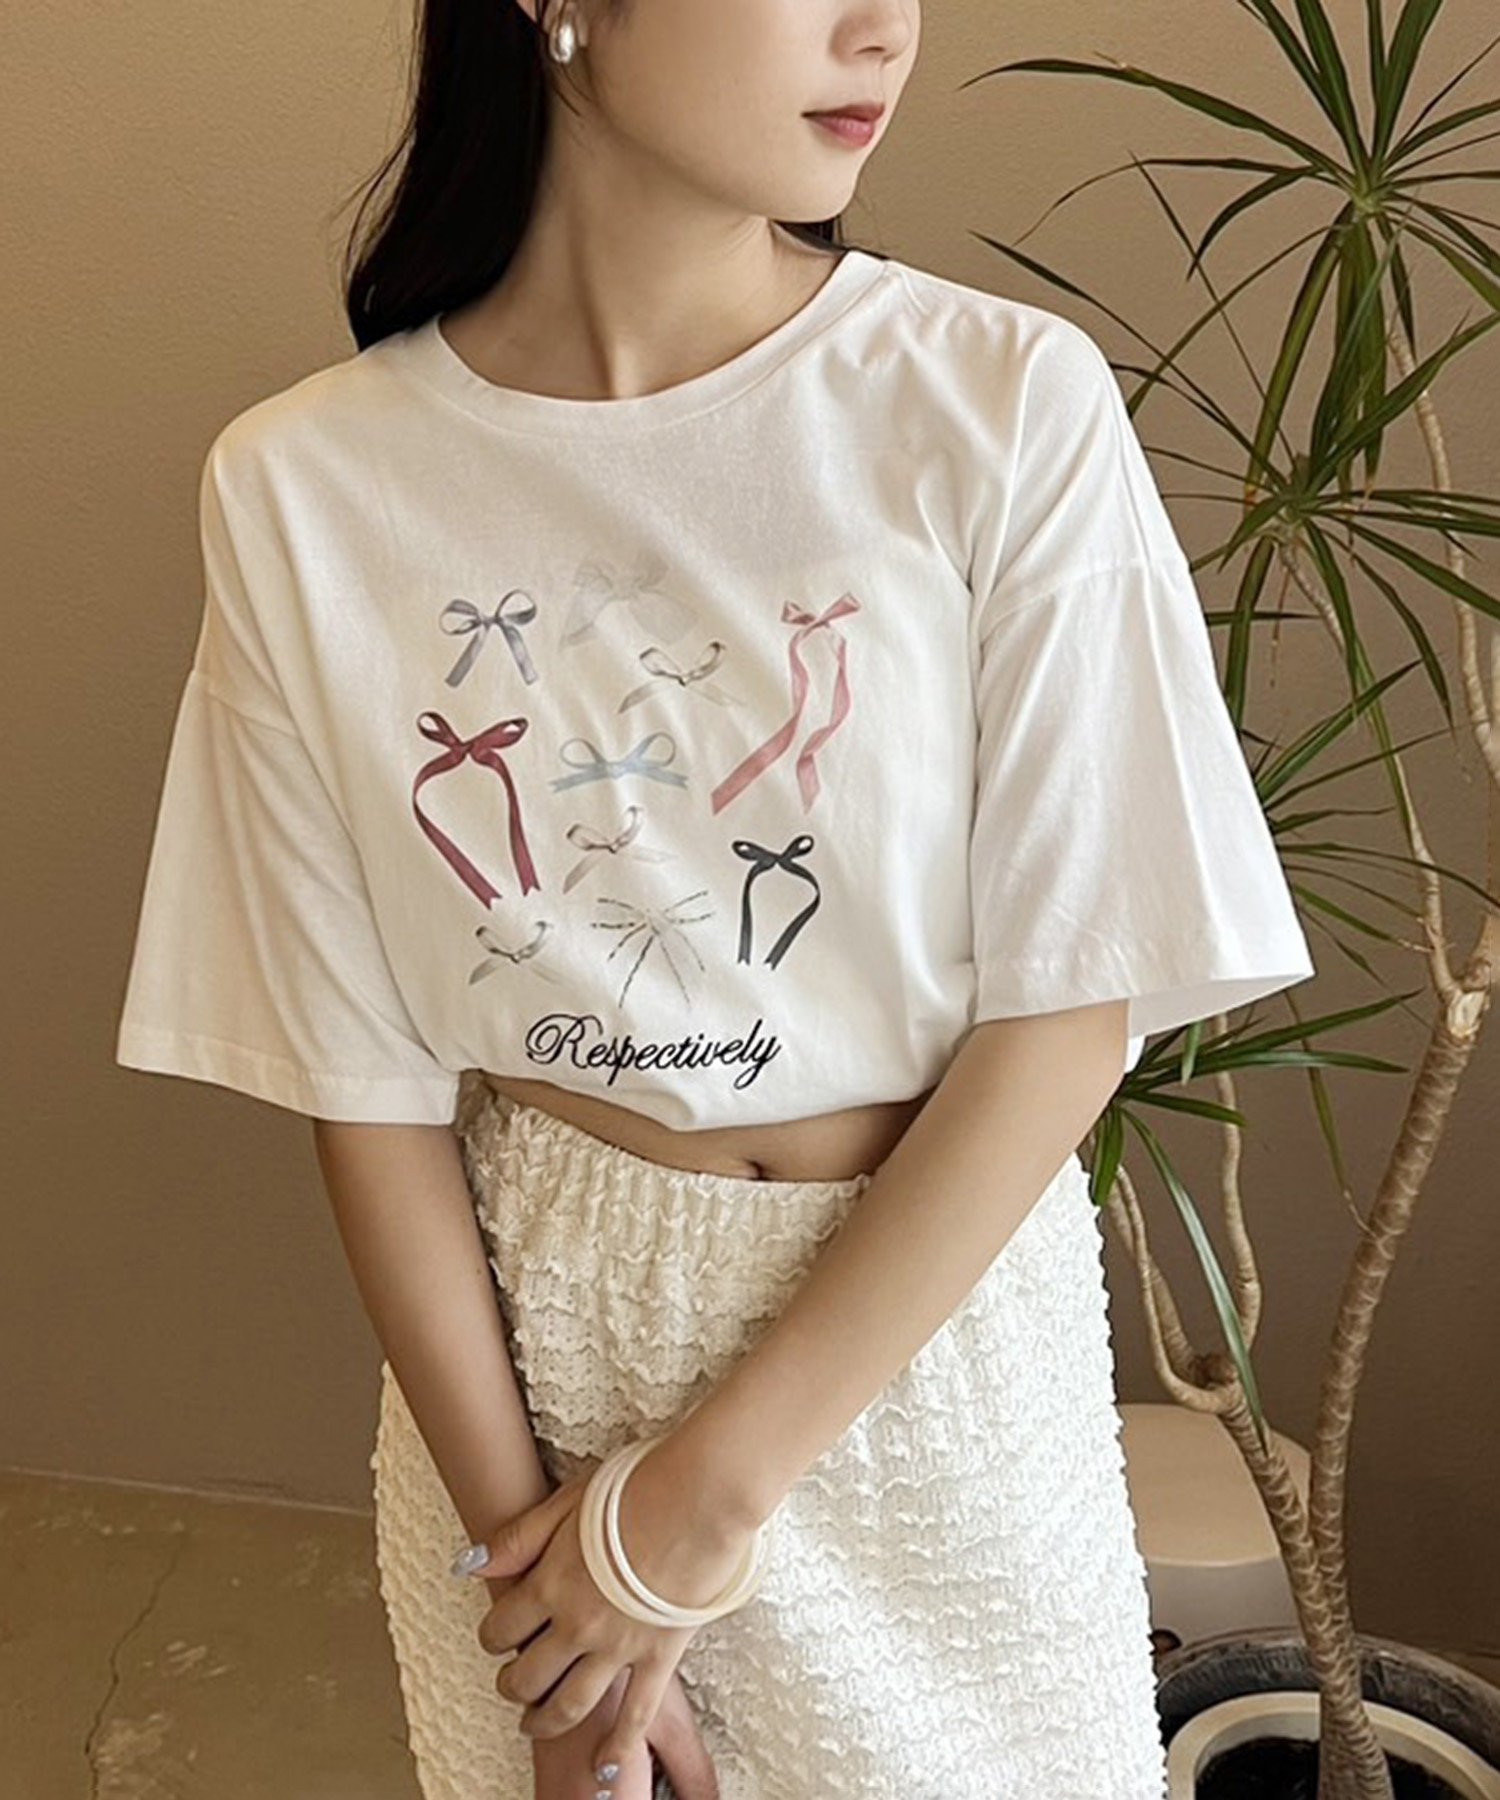 【SALE／10%OFF】one after another NICE CLAUP アソートゆるTEE/手洗い可 ワンアフターアナザー ナイスクラップ トップス カットソー・Tシャツ ホワイト グレー パープル